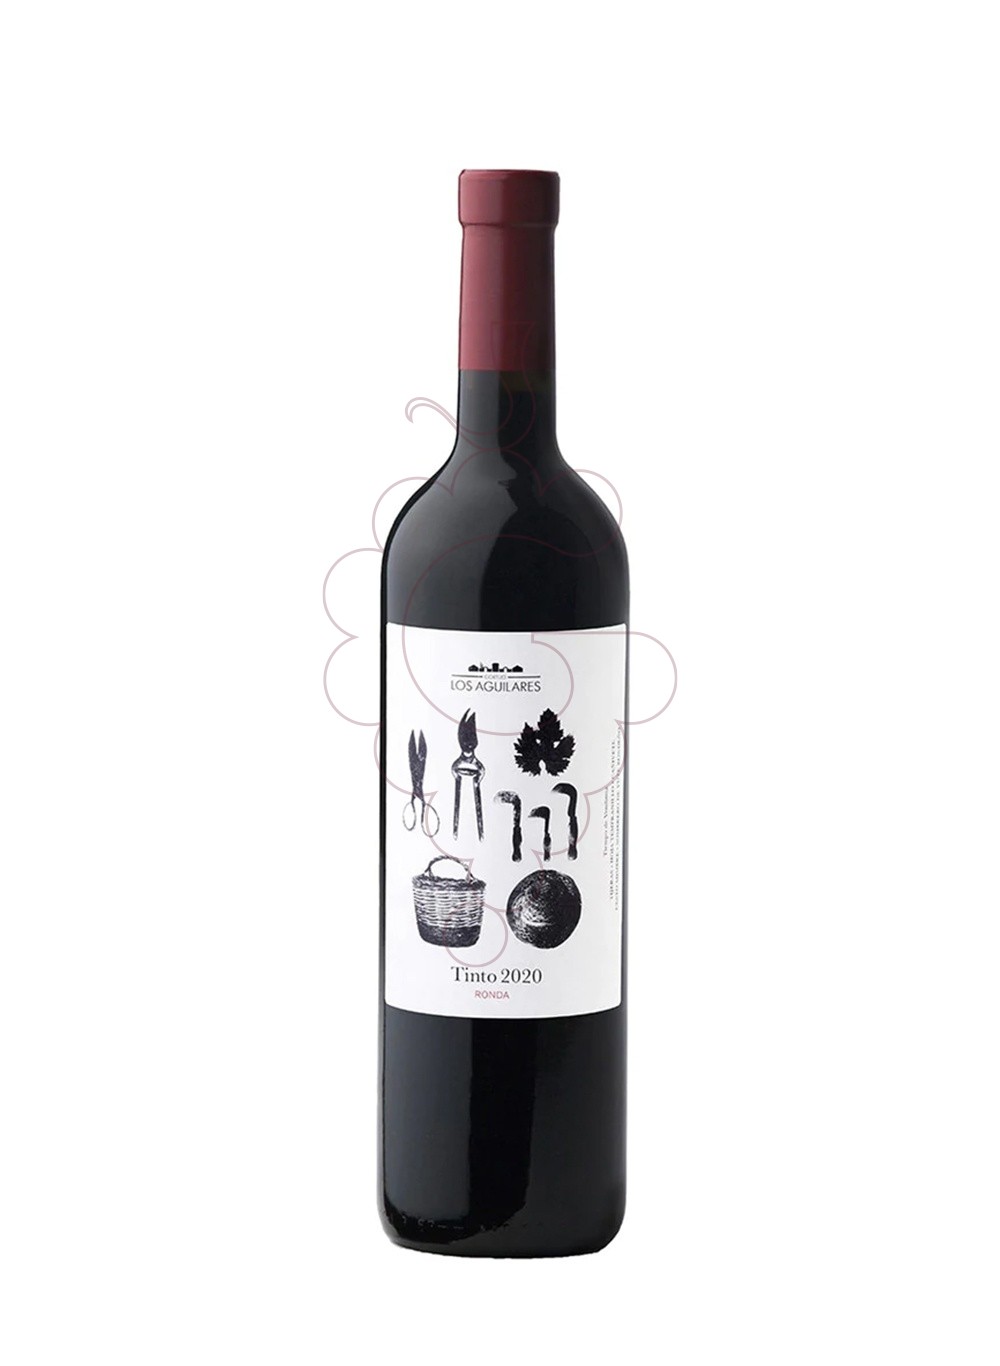 Photo Los aguilares negre 2020 75 cl red wine